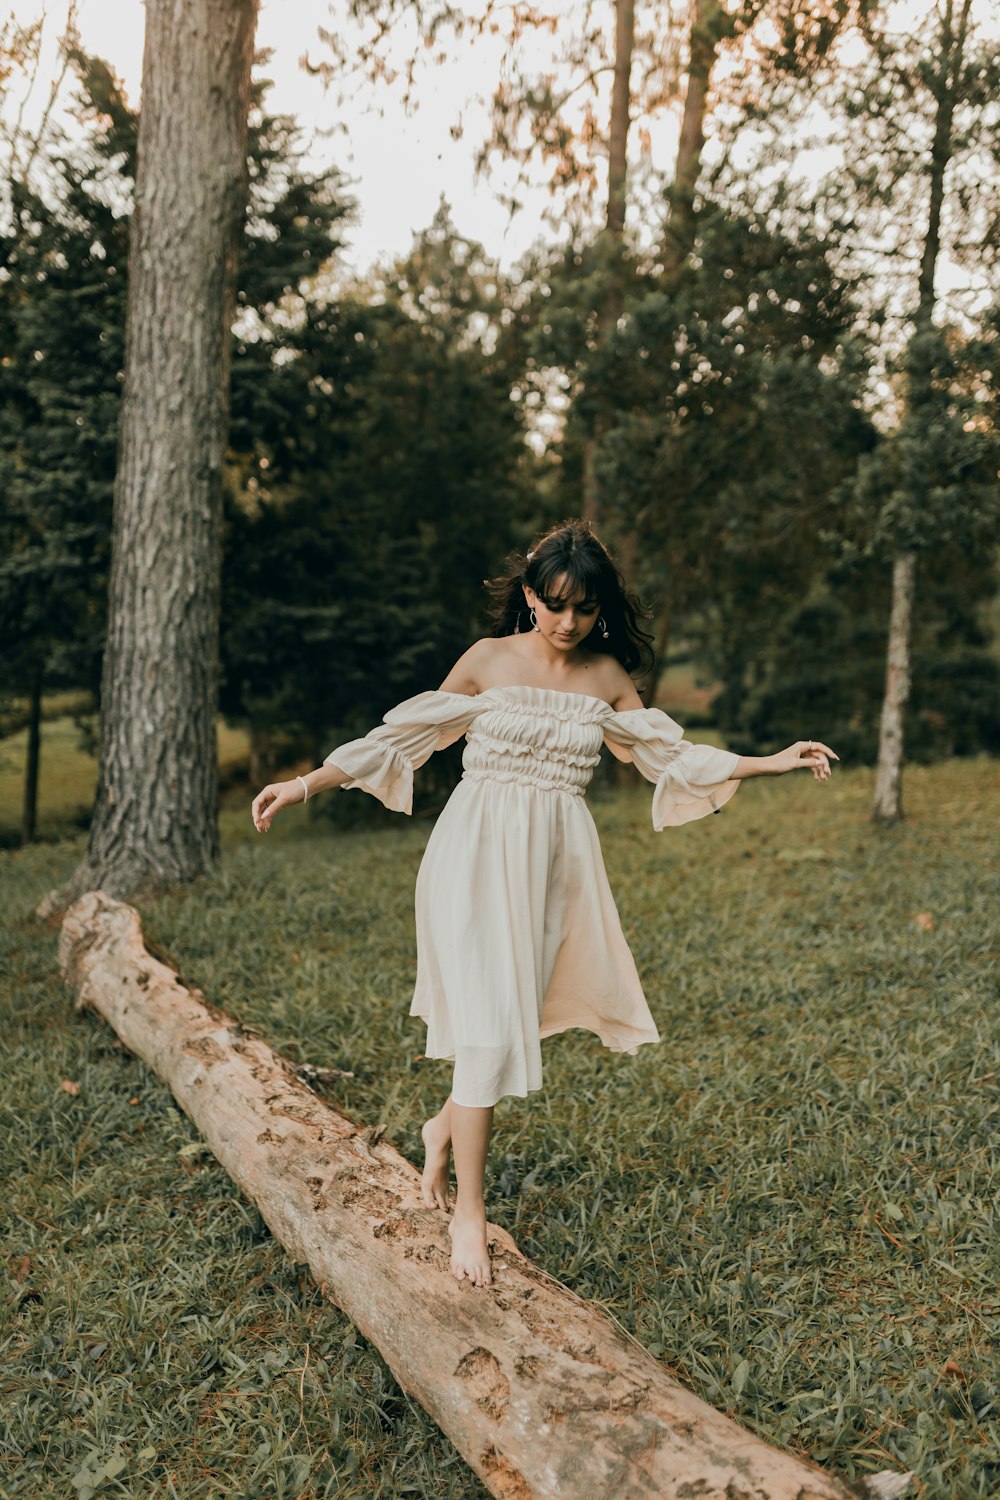 a girl in a white dress is balancing on a log